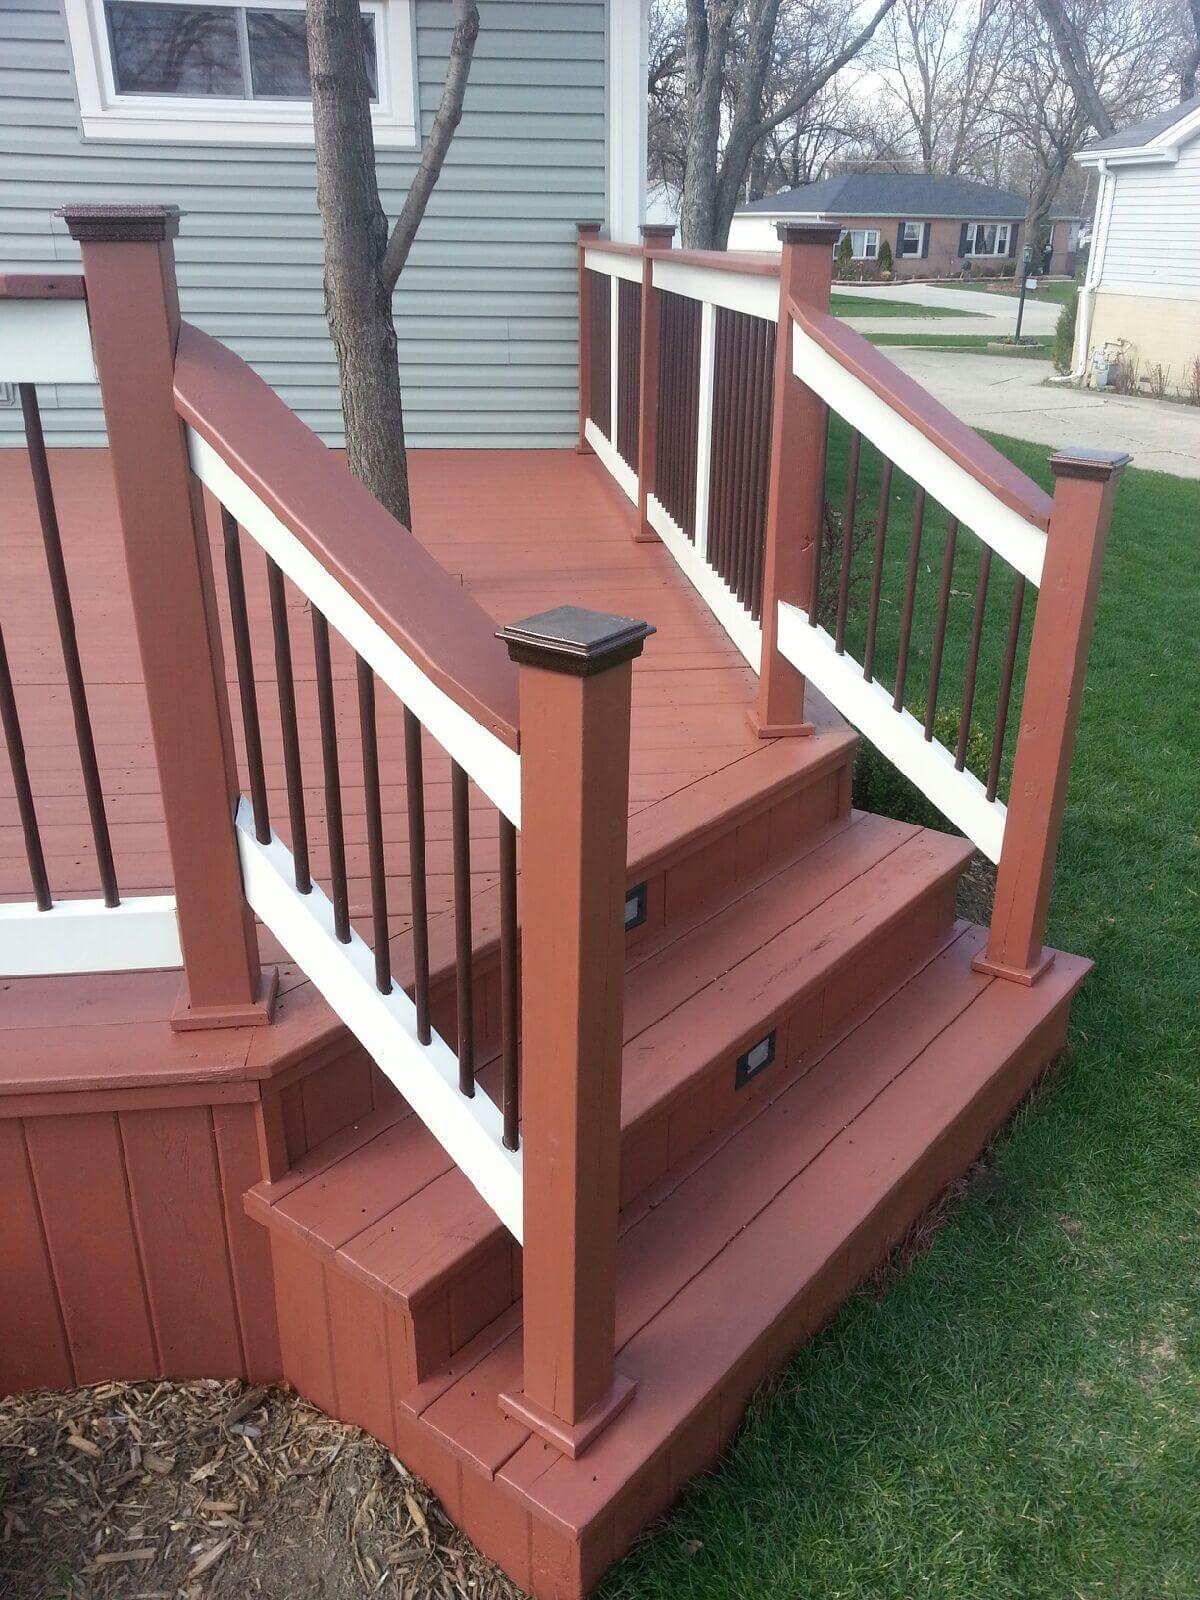 Repairs and maintenance for your deck, fence, and exterior wood staining. - Deck Staining La Grange - Deck Cleaning Services